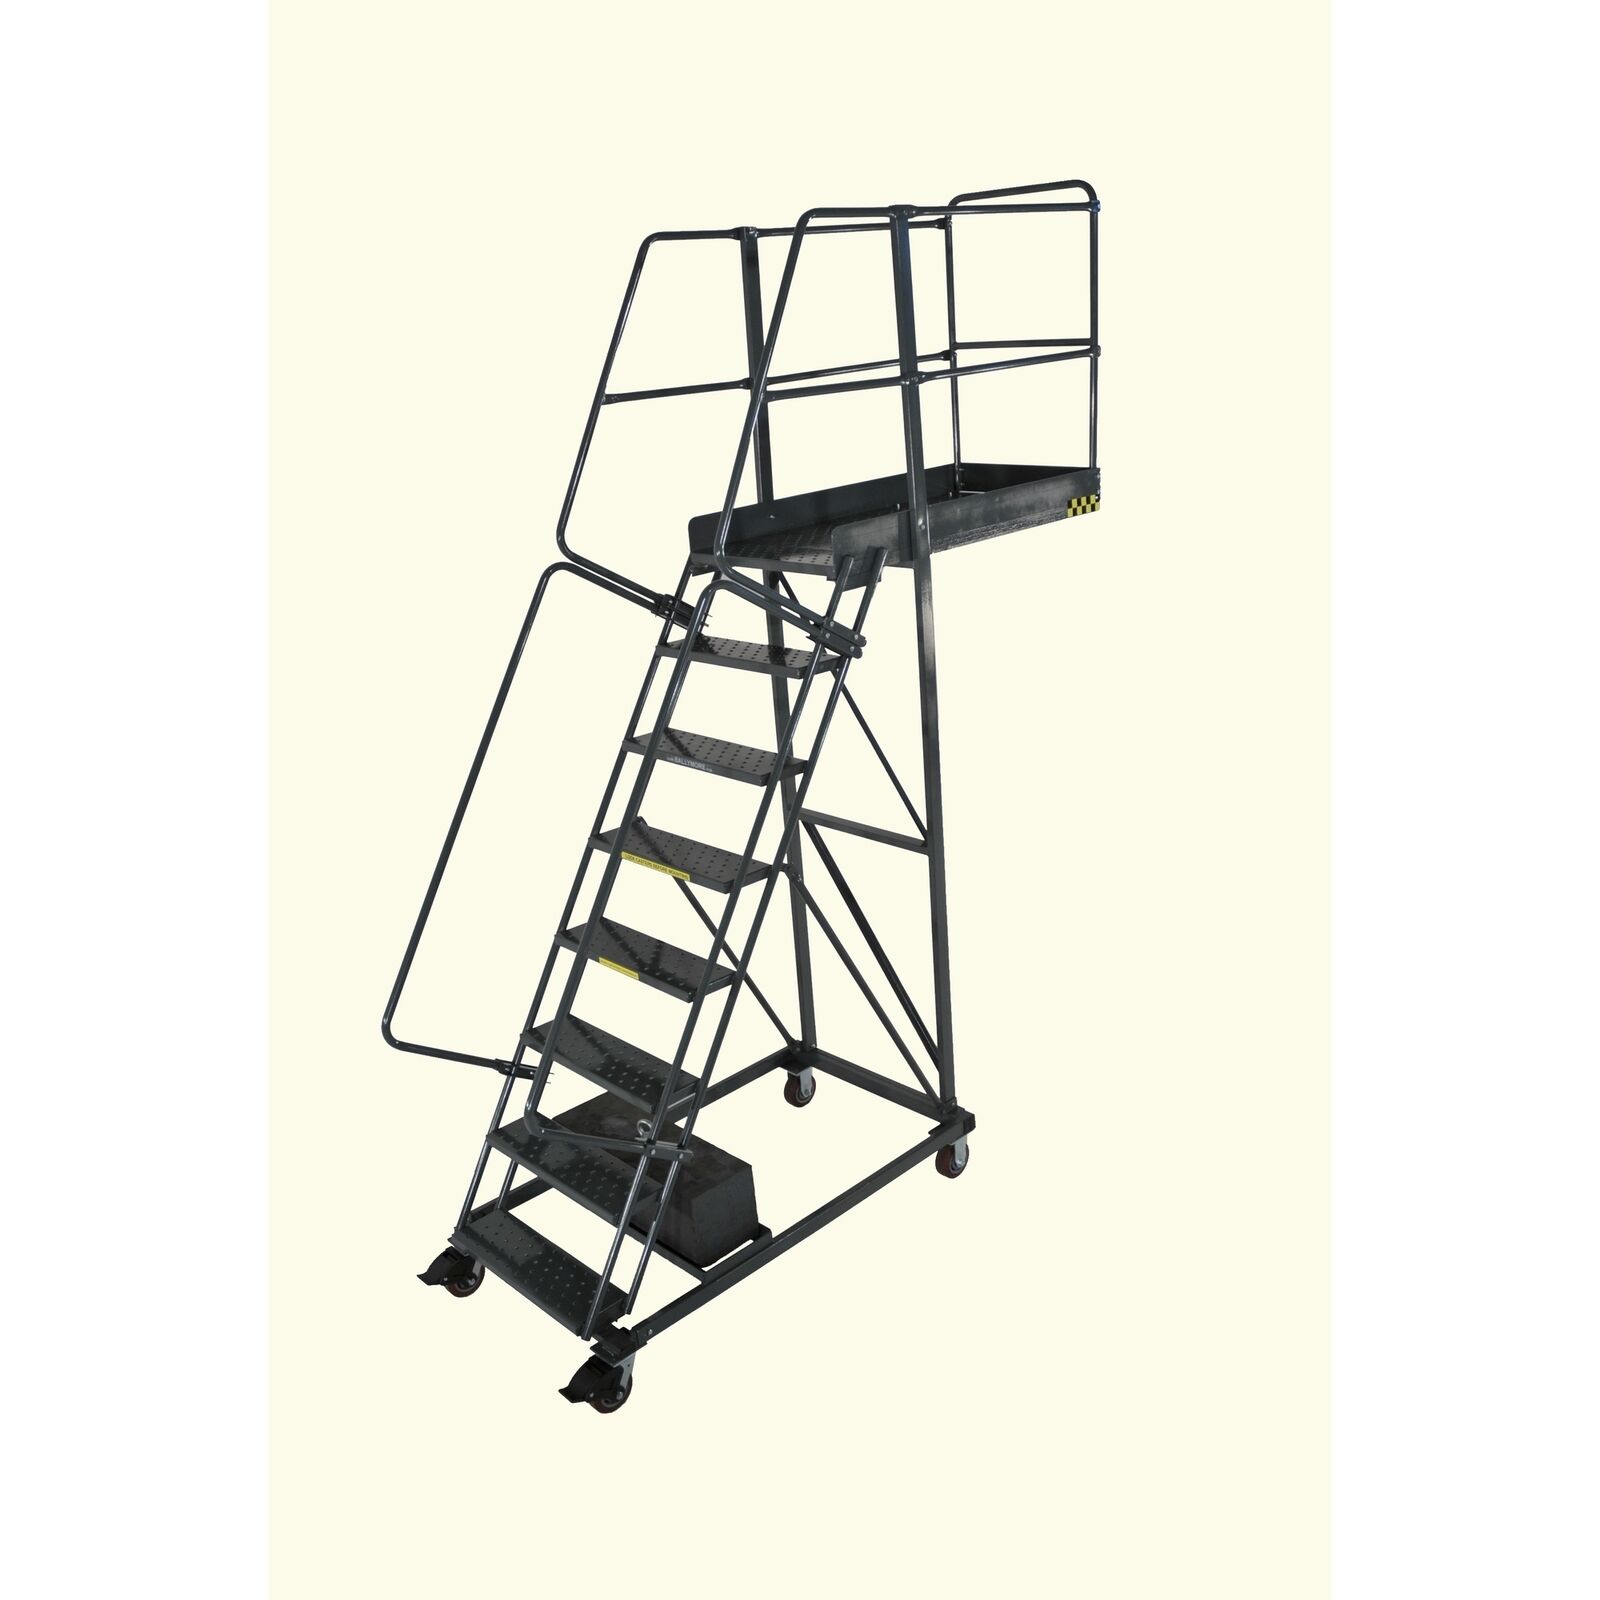 Ballymore Rolling Ladder Overall Height 120 In Steps 8 Cap 300 Lb